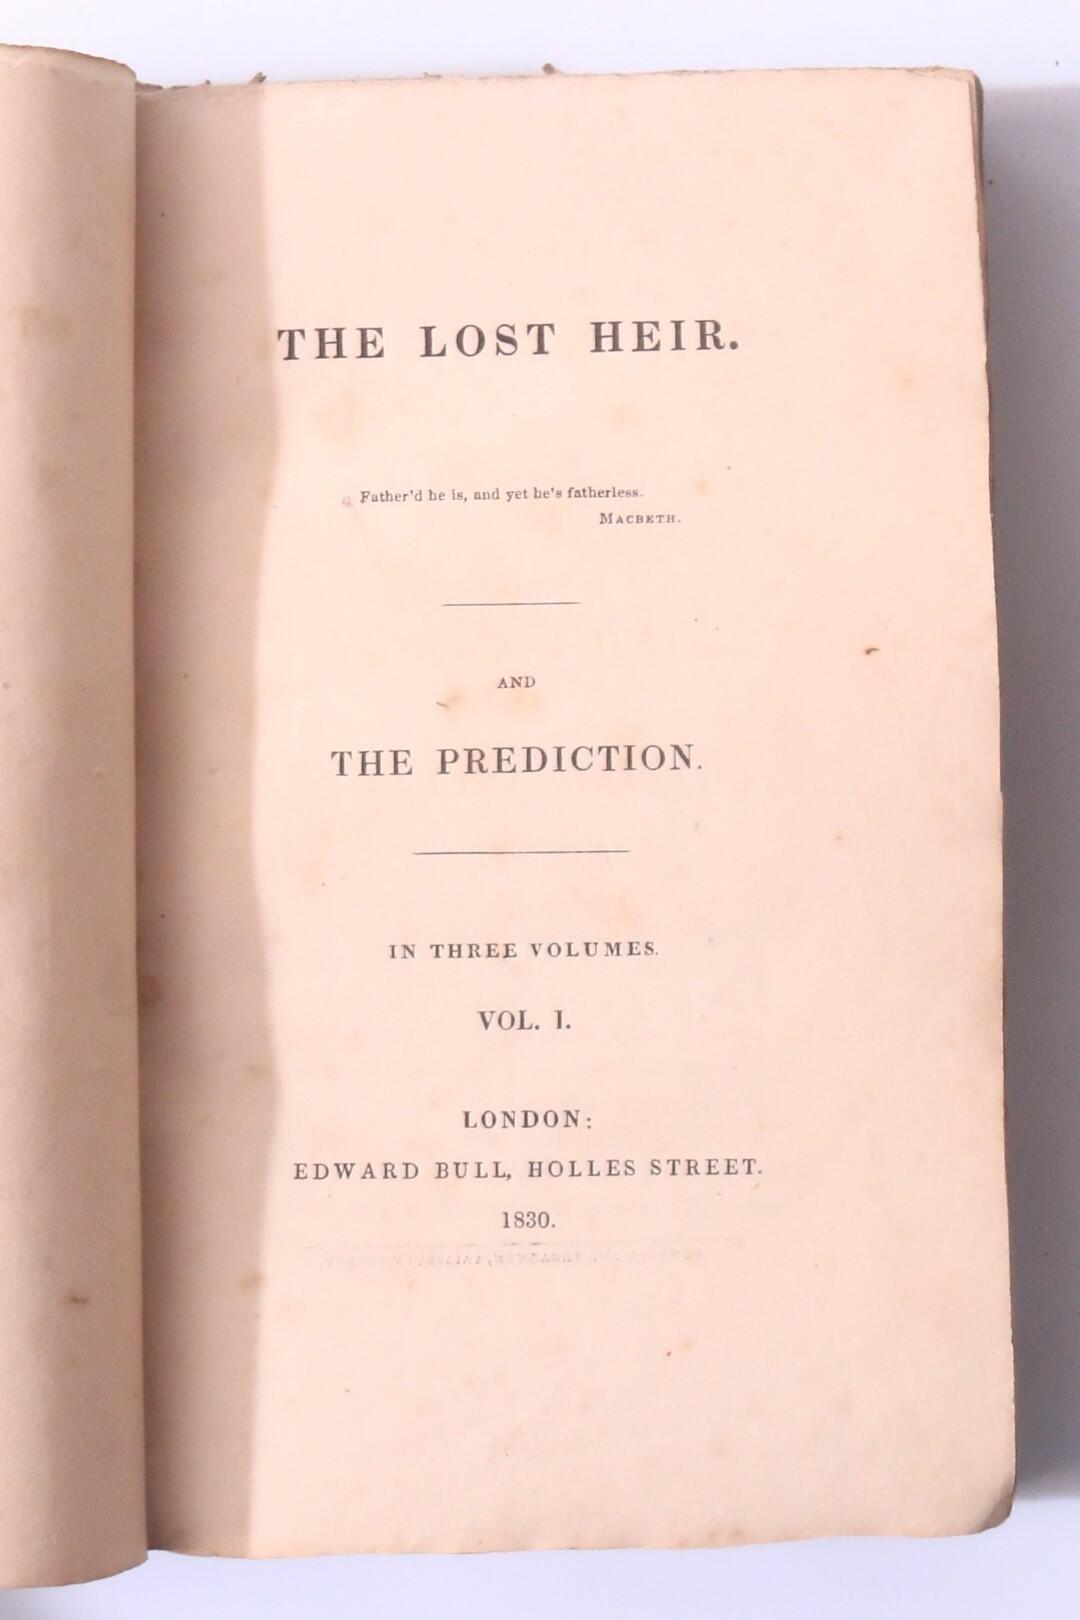 Tyrone Power - The Lost Heir and the Prediction - Edward Bull, 1830, First Edition.